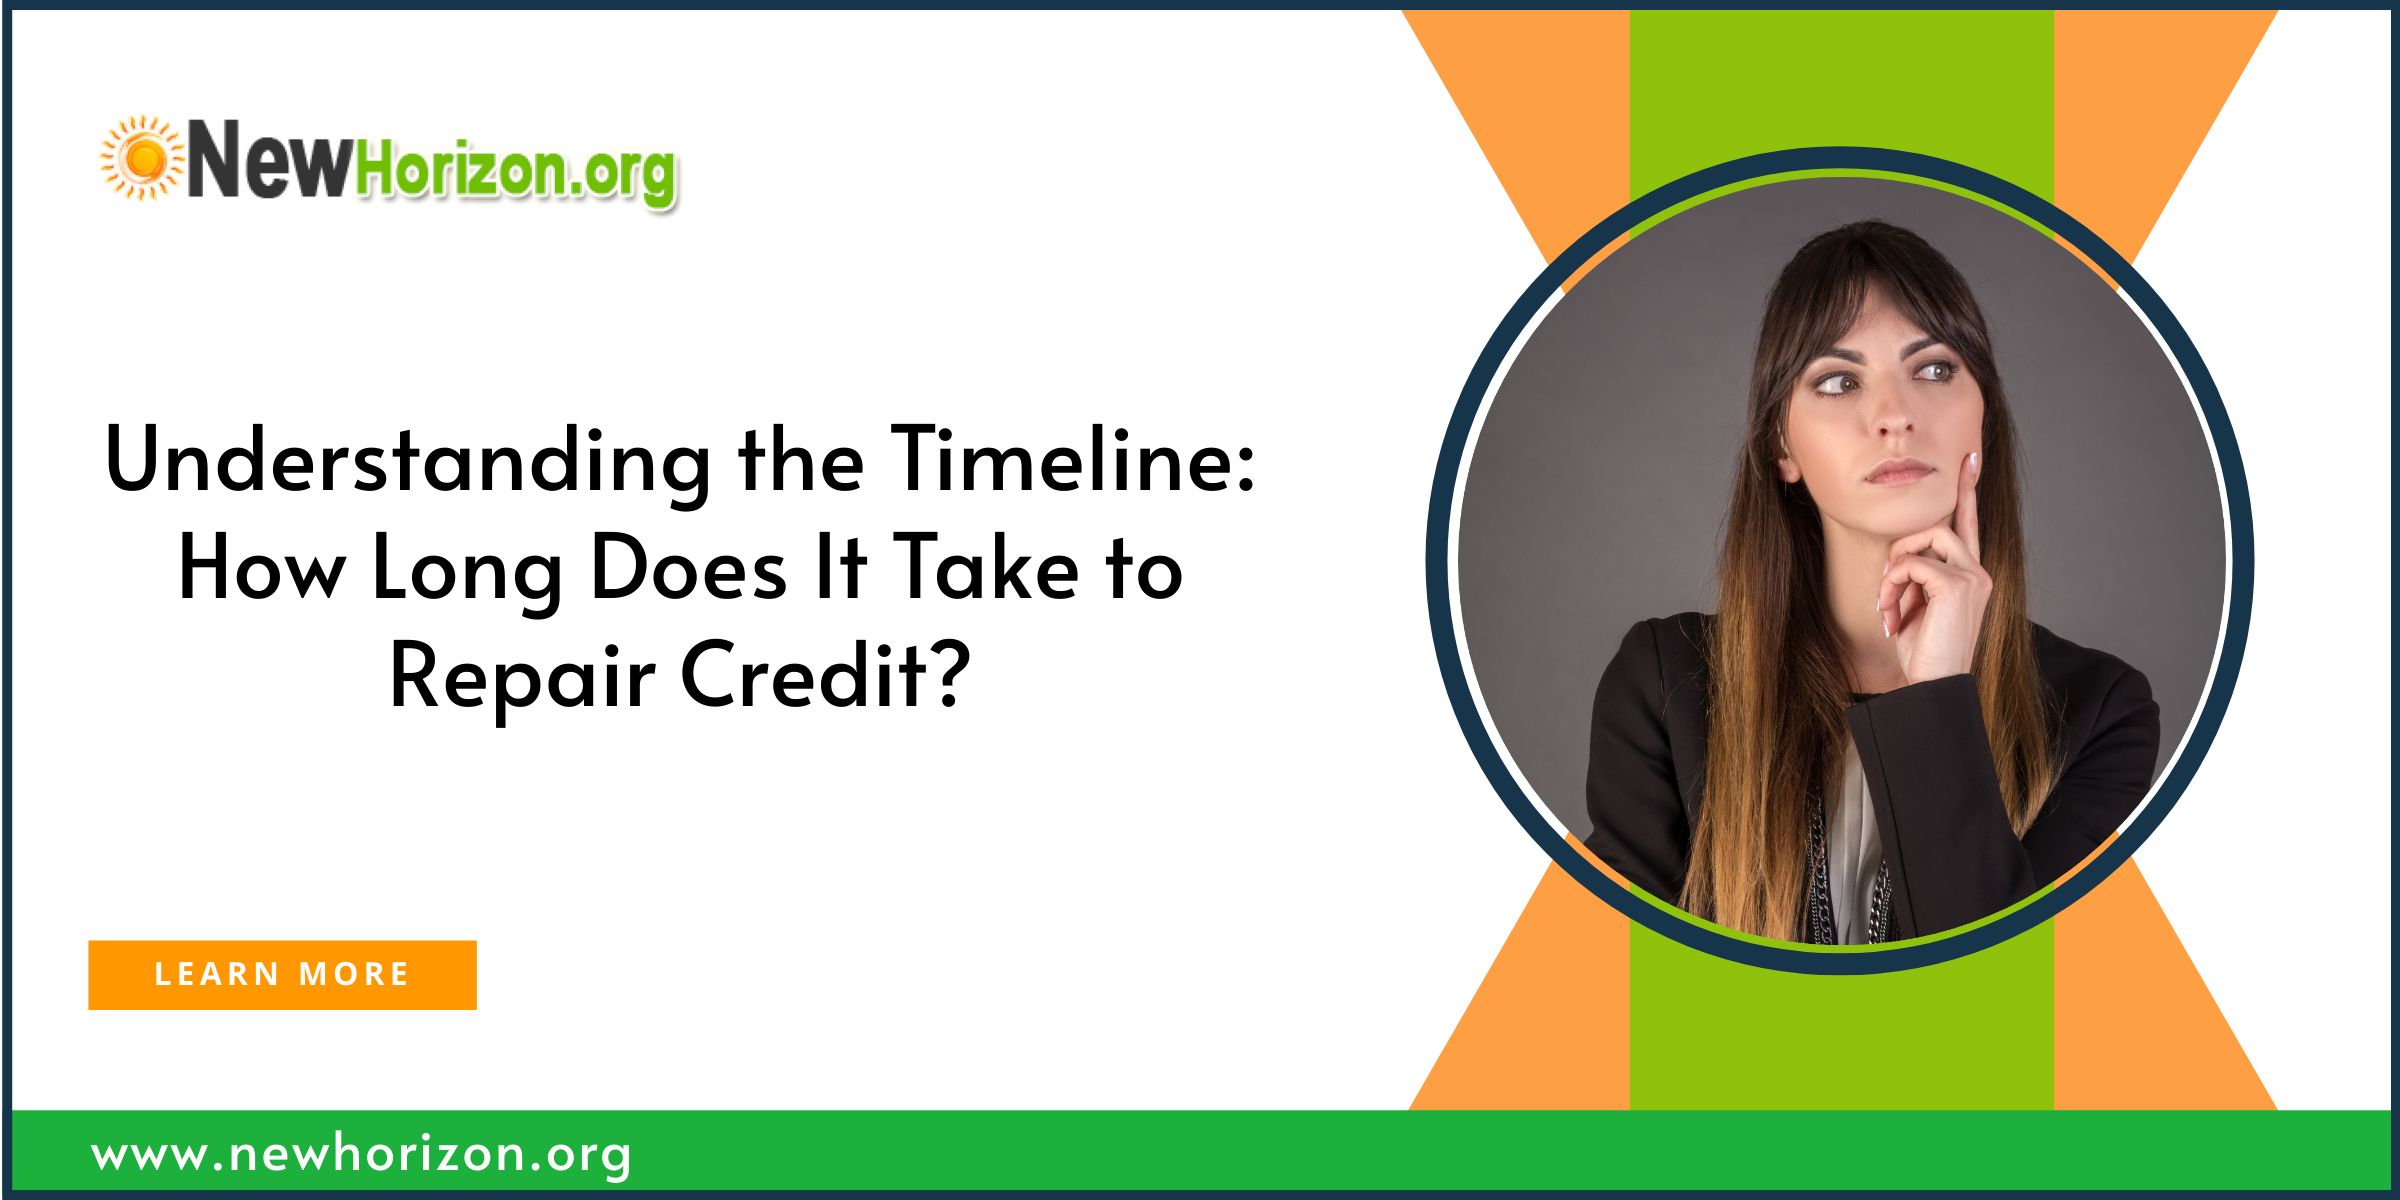 Understanding the Timeline: How Long Does It Take to Repair Credit?